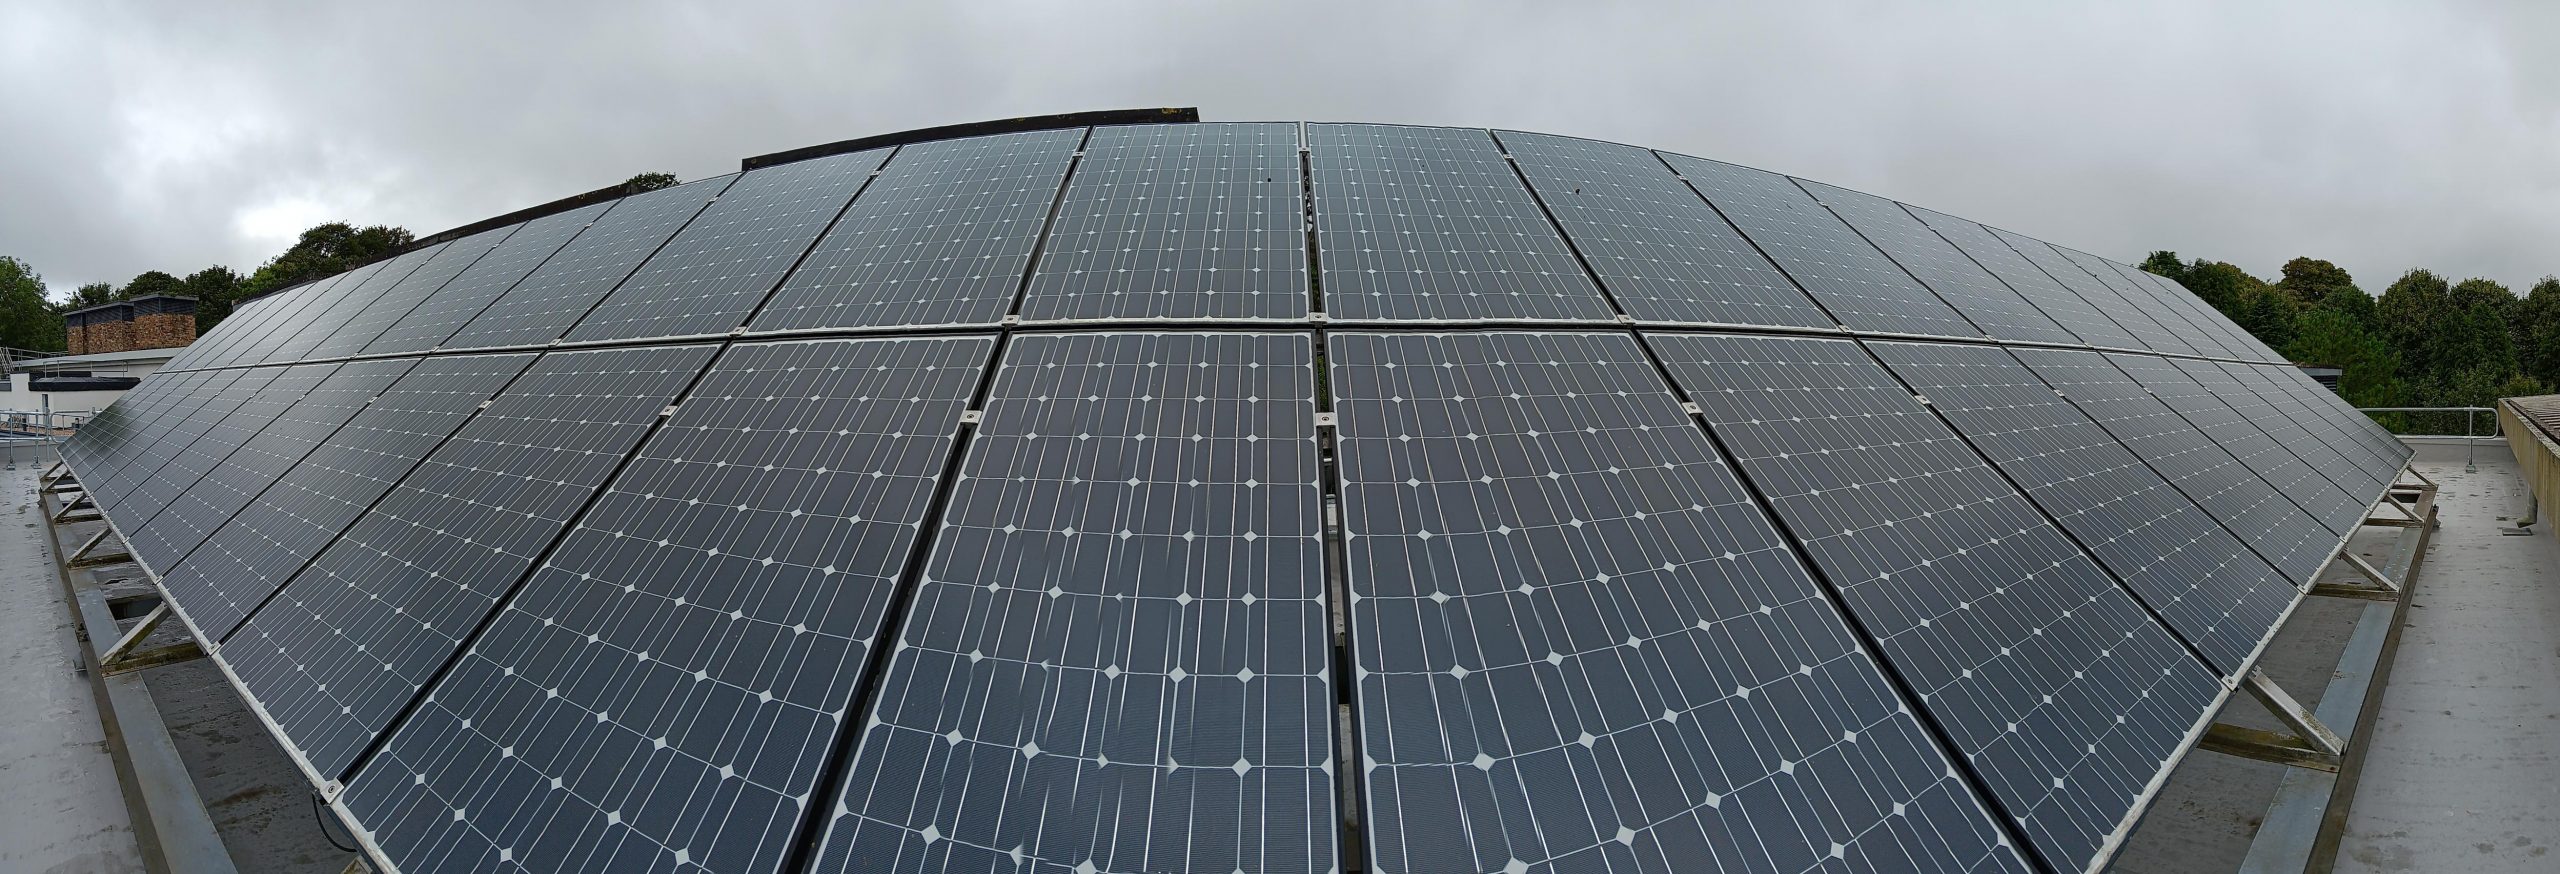 New Photovoltaic System Set to Save 149 Tonnes of Carbon